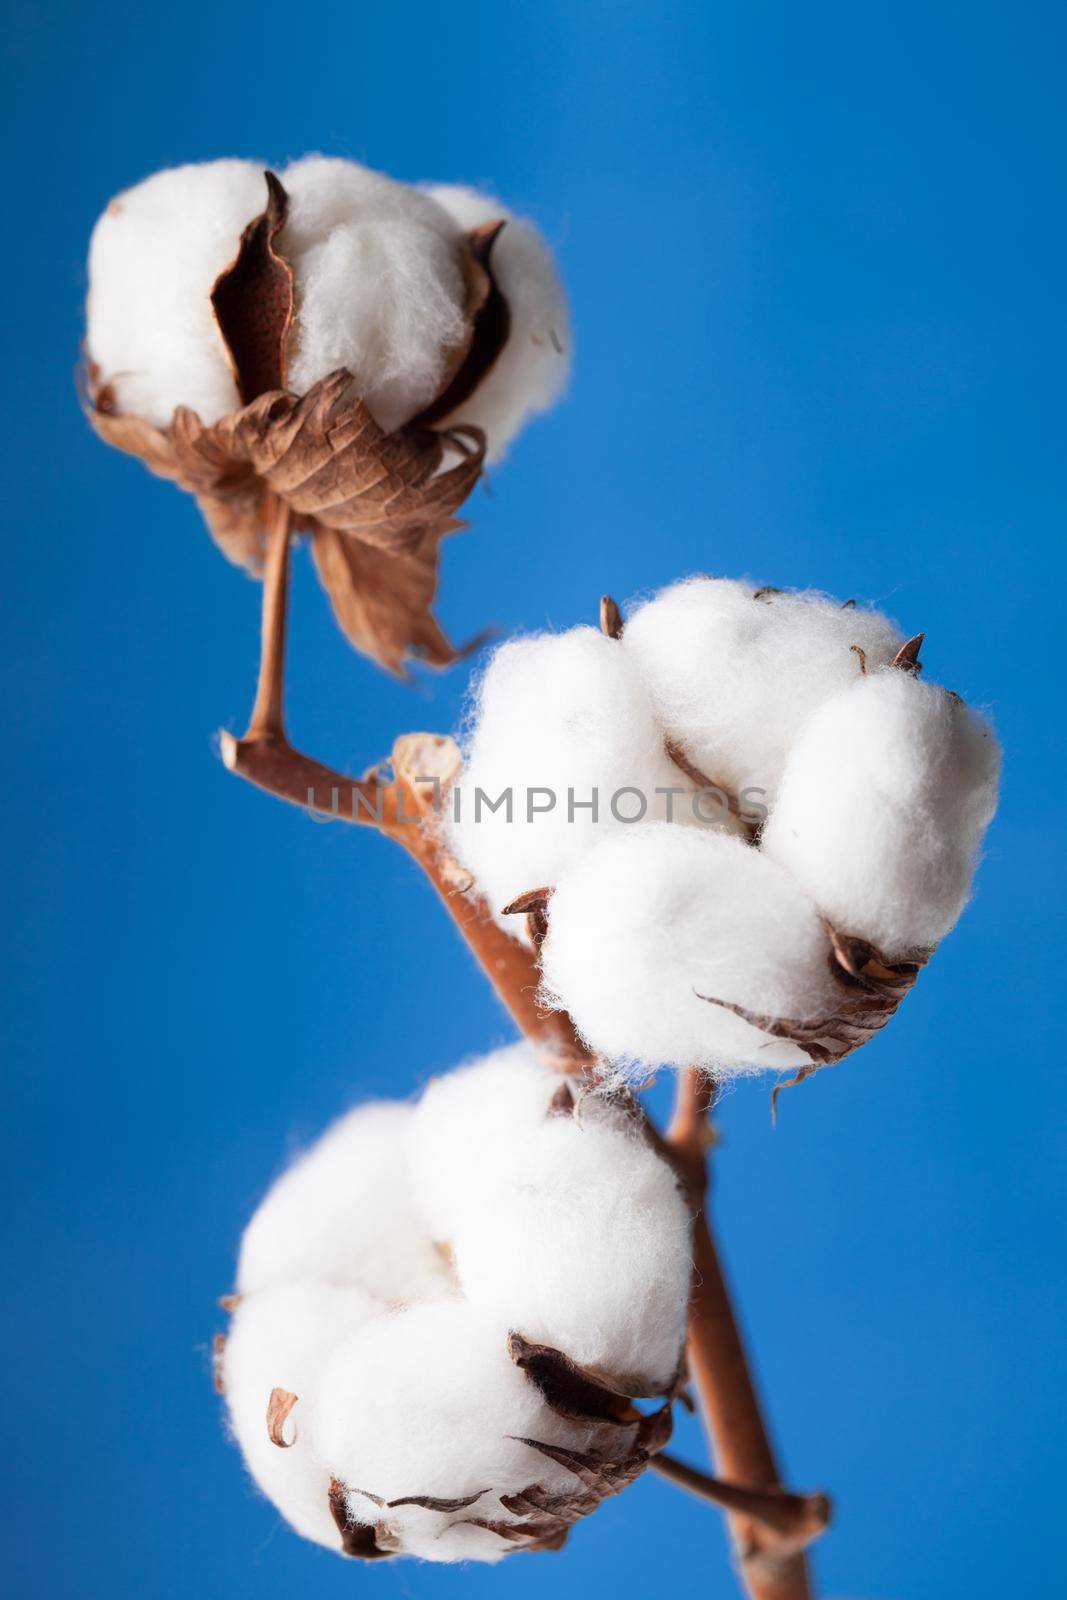 Cotton flower close up on blue background